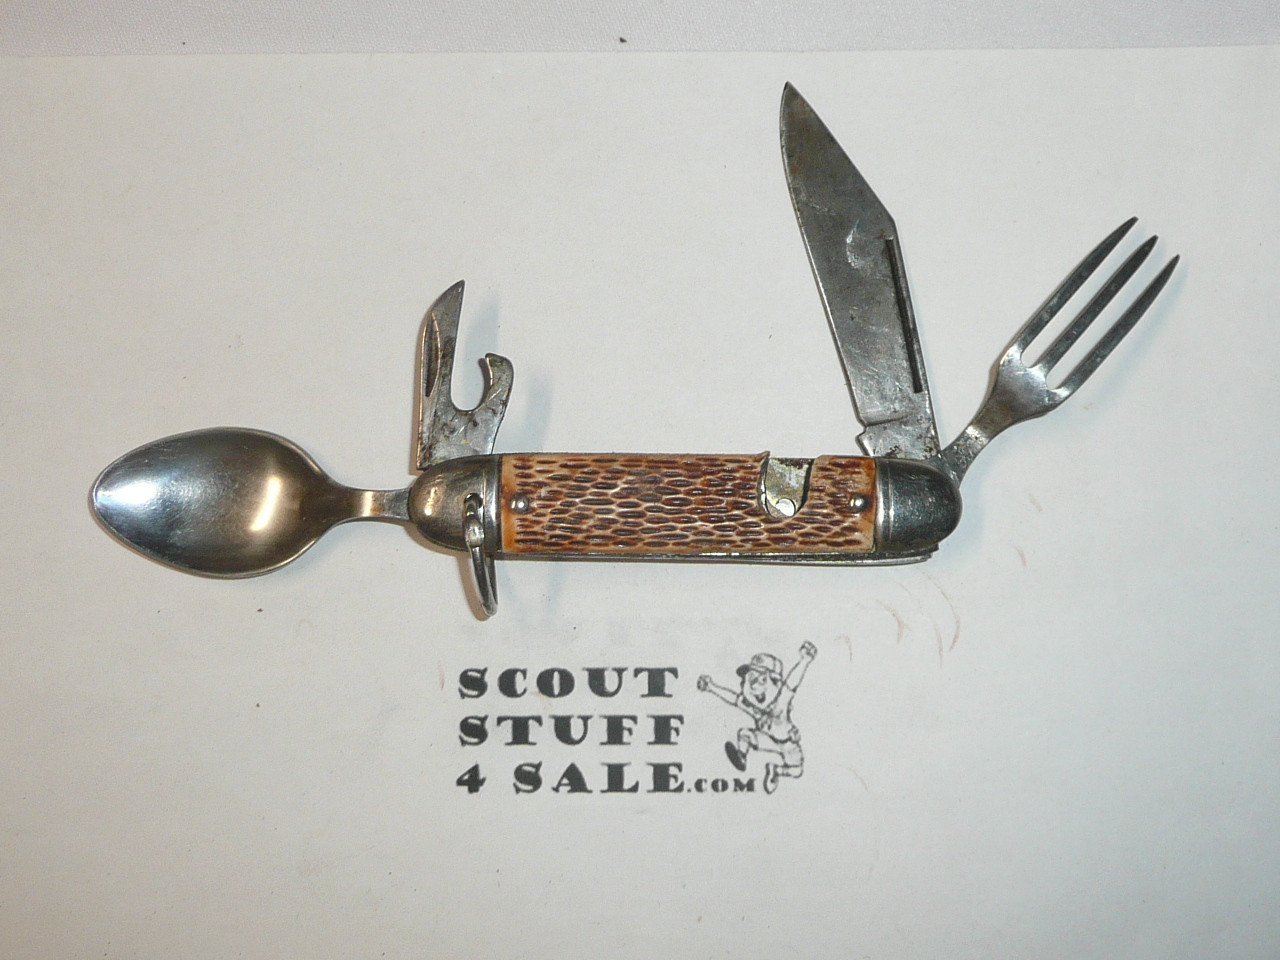 Fork, Knife, Spoon and Can Opener Bone Handled Knife, used (PAT9)